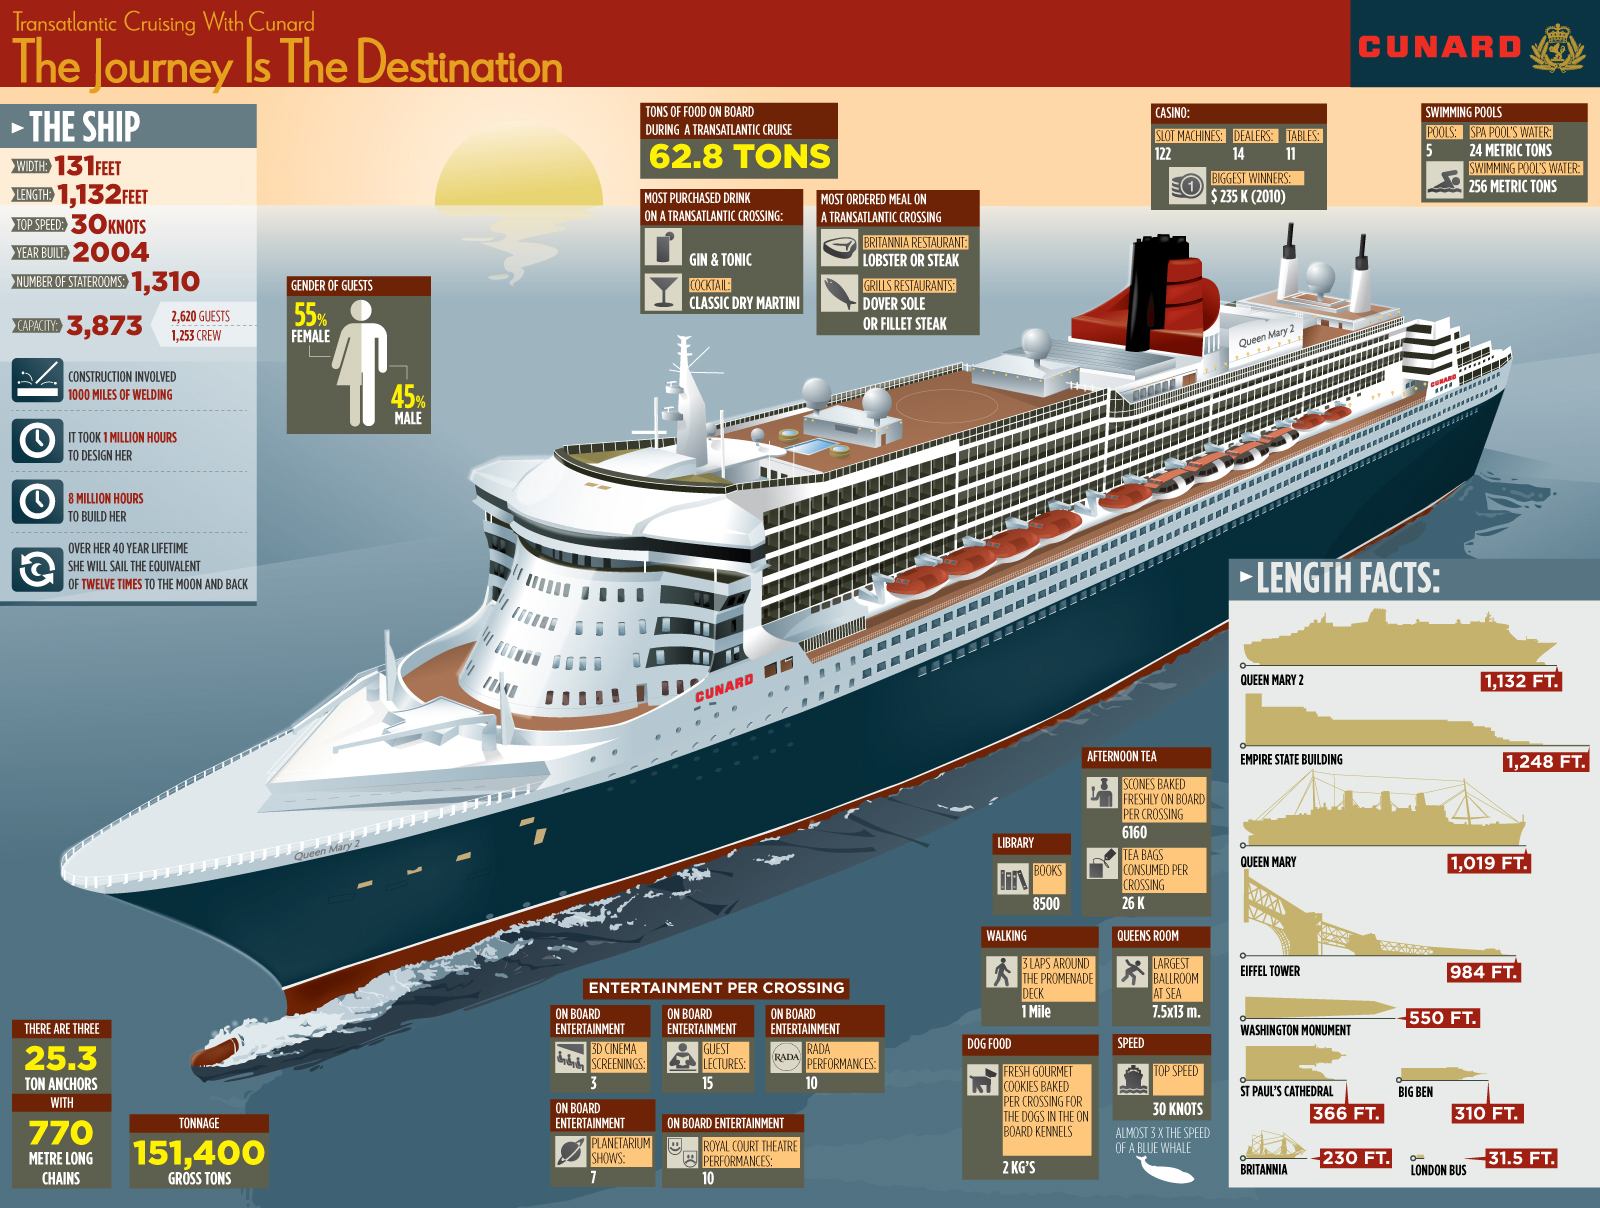 Nick's Cruise Corner Cunard Queen Mary 2 Comparisons and Interesting Facts